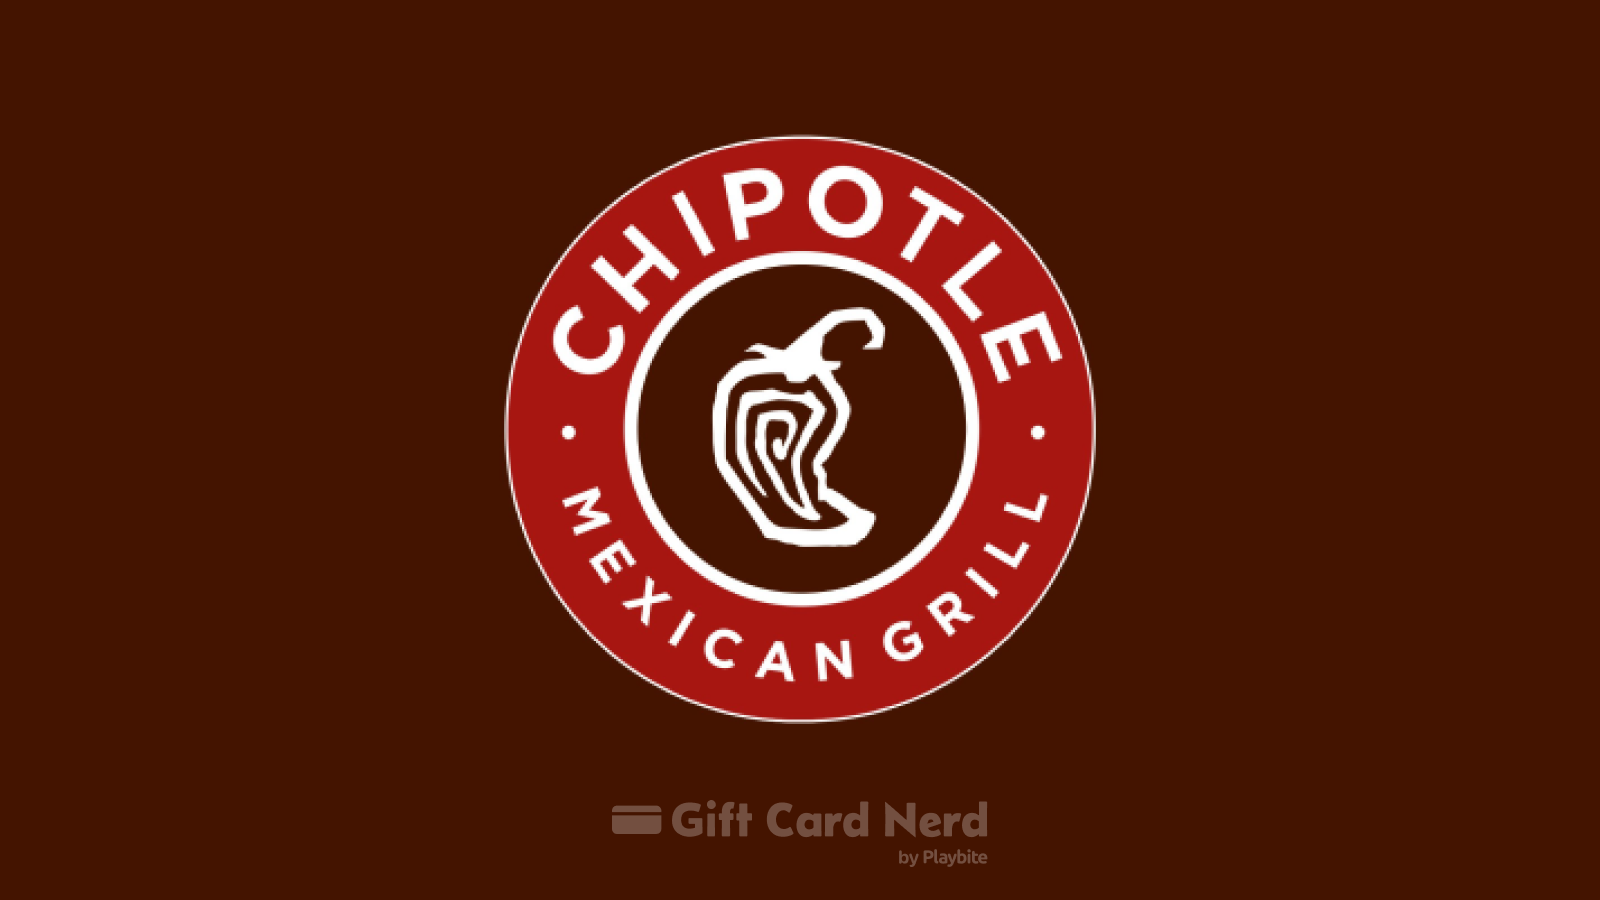 Can I use a Chipotle gift card on Postmates?